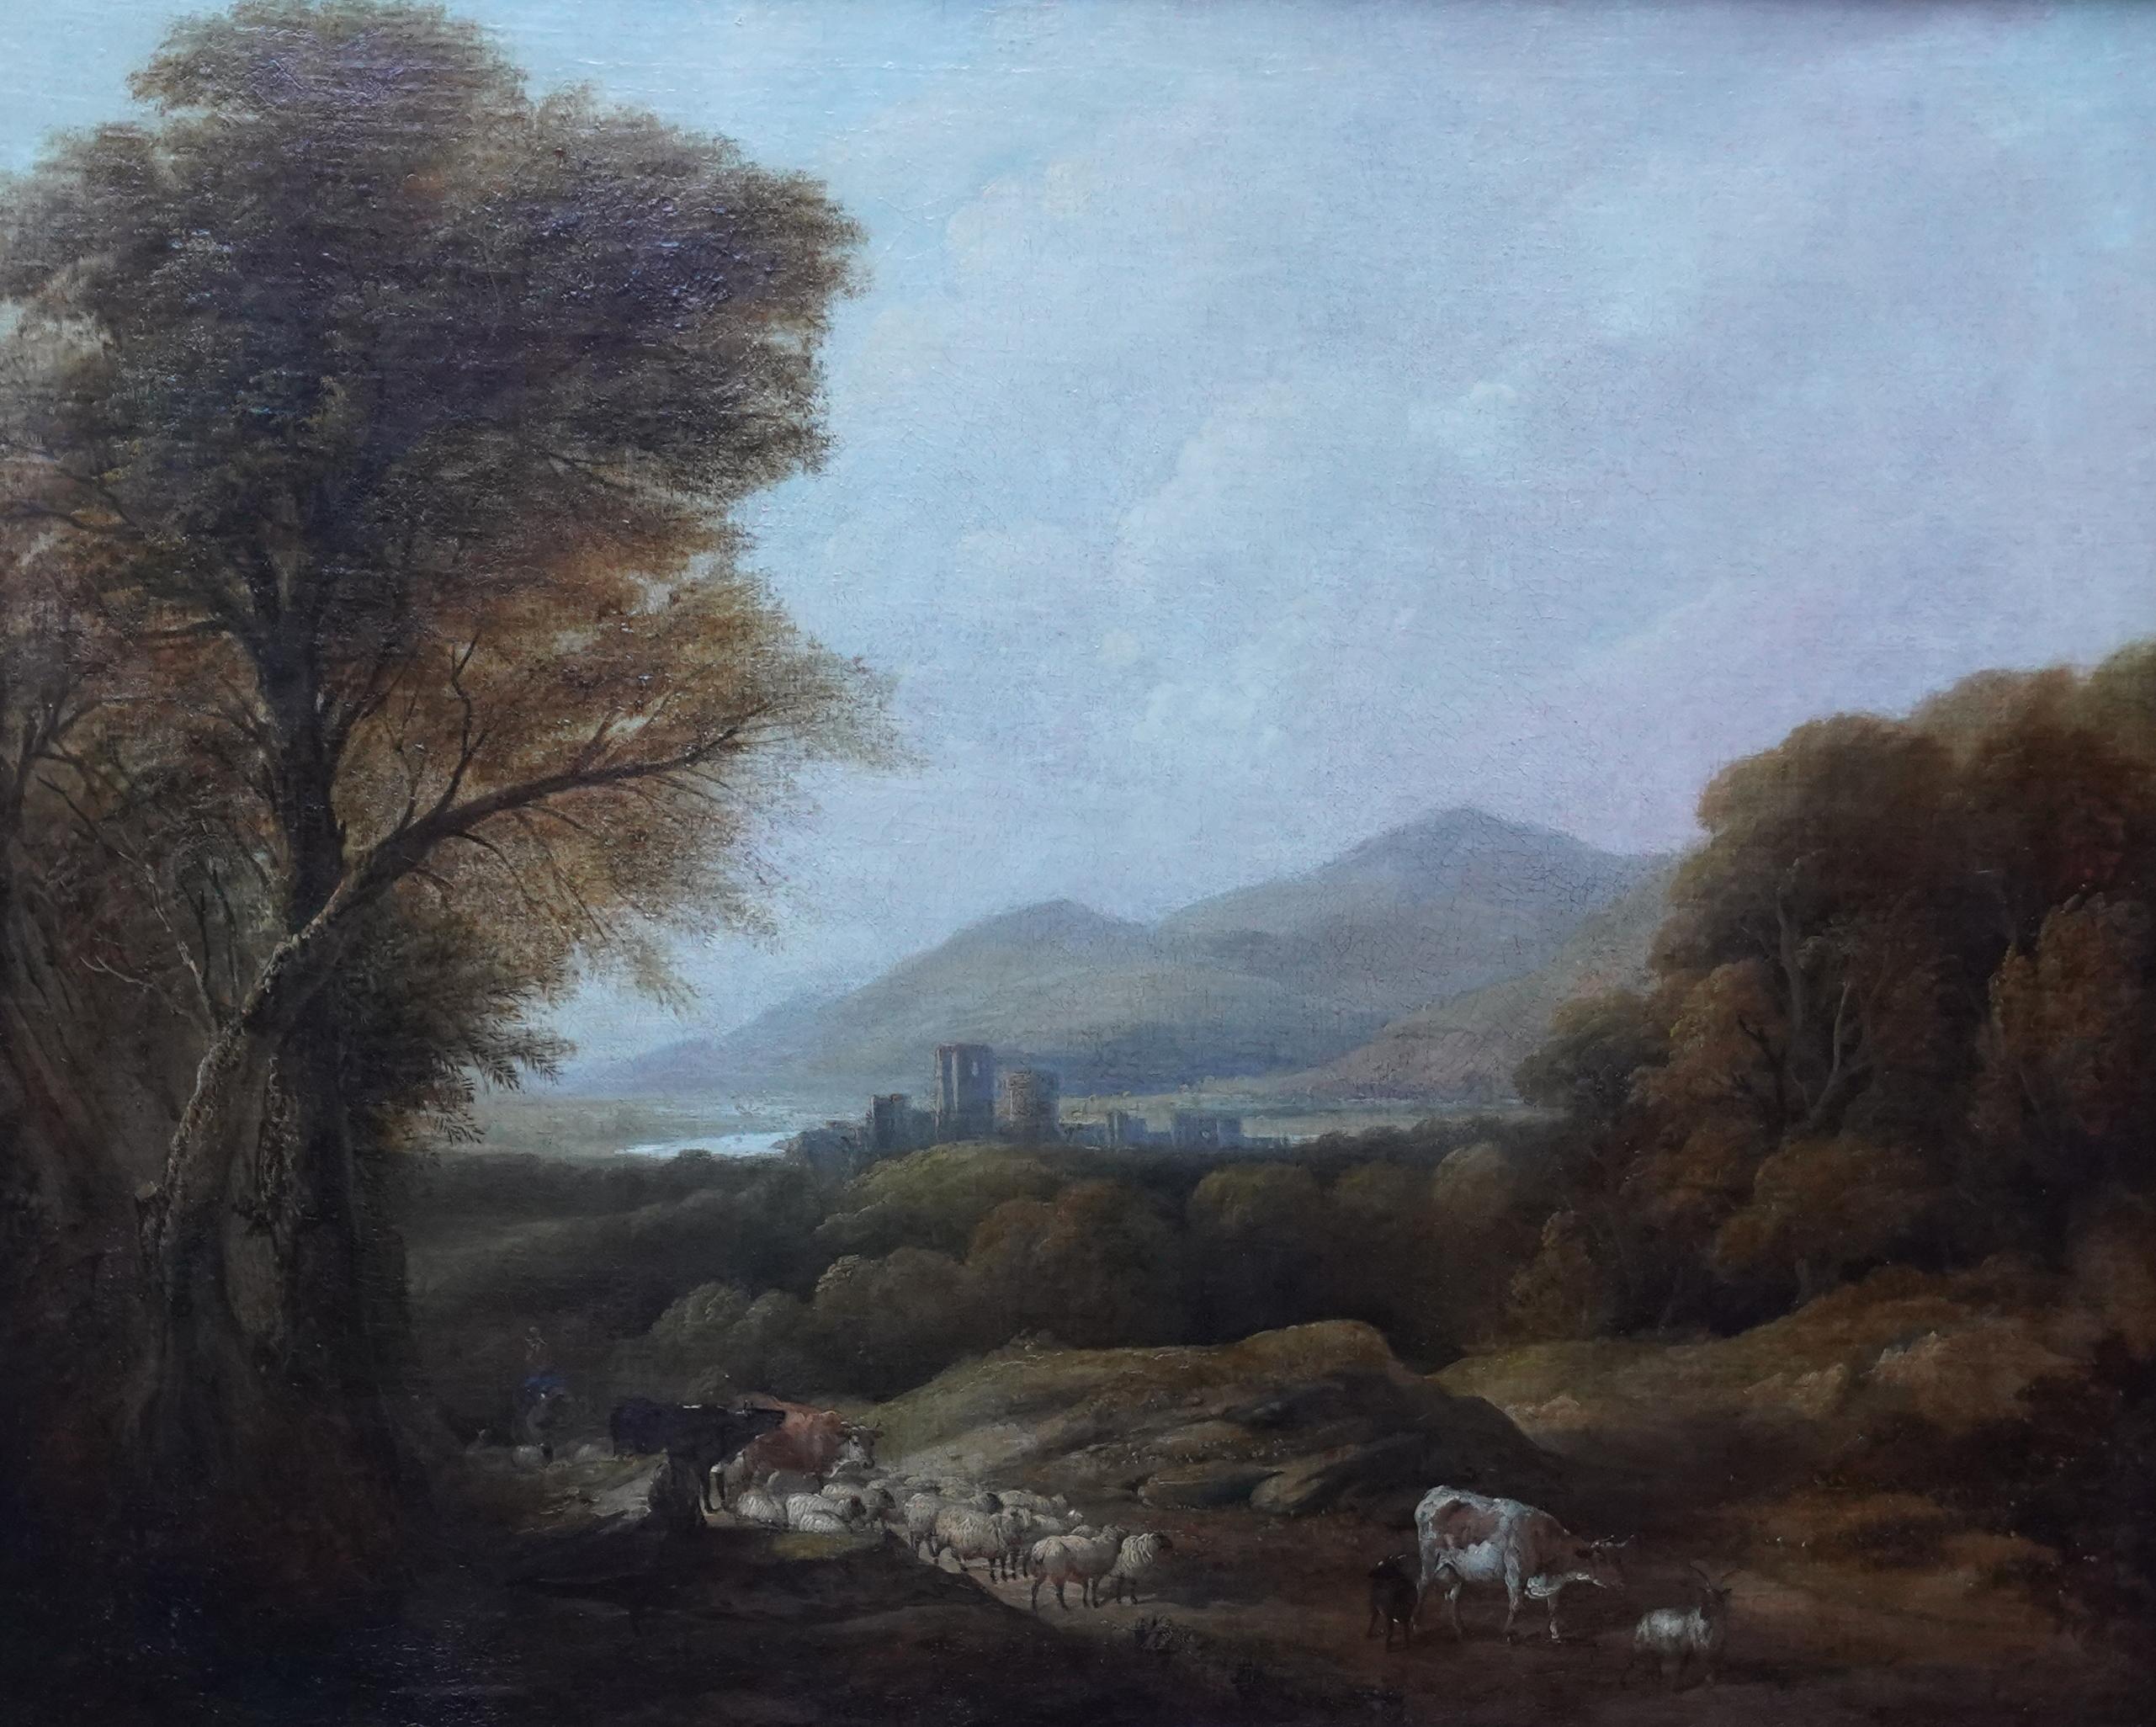 Cattle and Drover in a Landscape - British Victorian art landscape oil painting - Painting by Henry Jutsum 